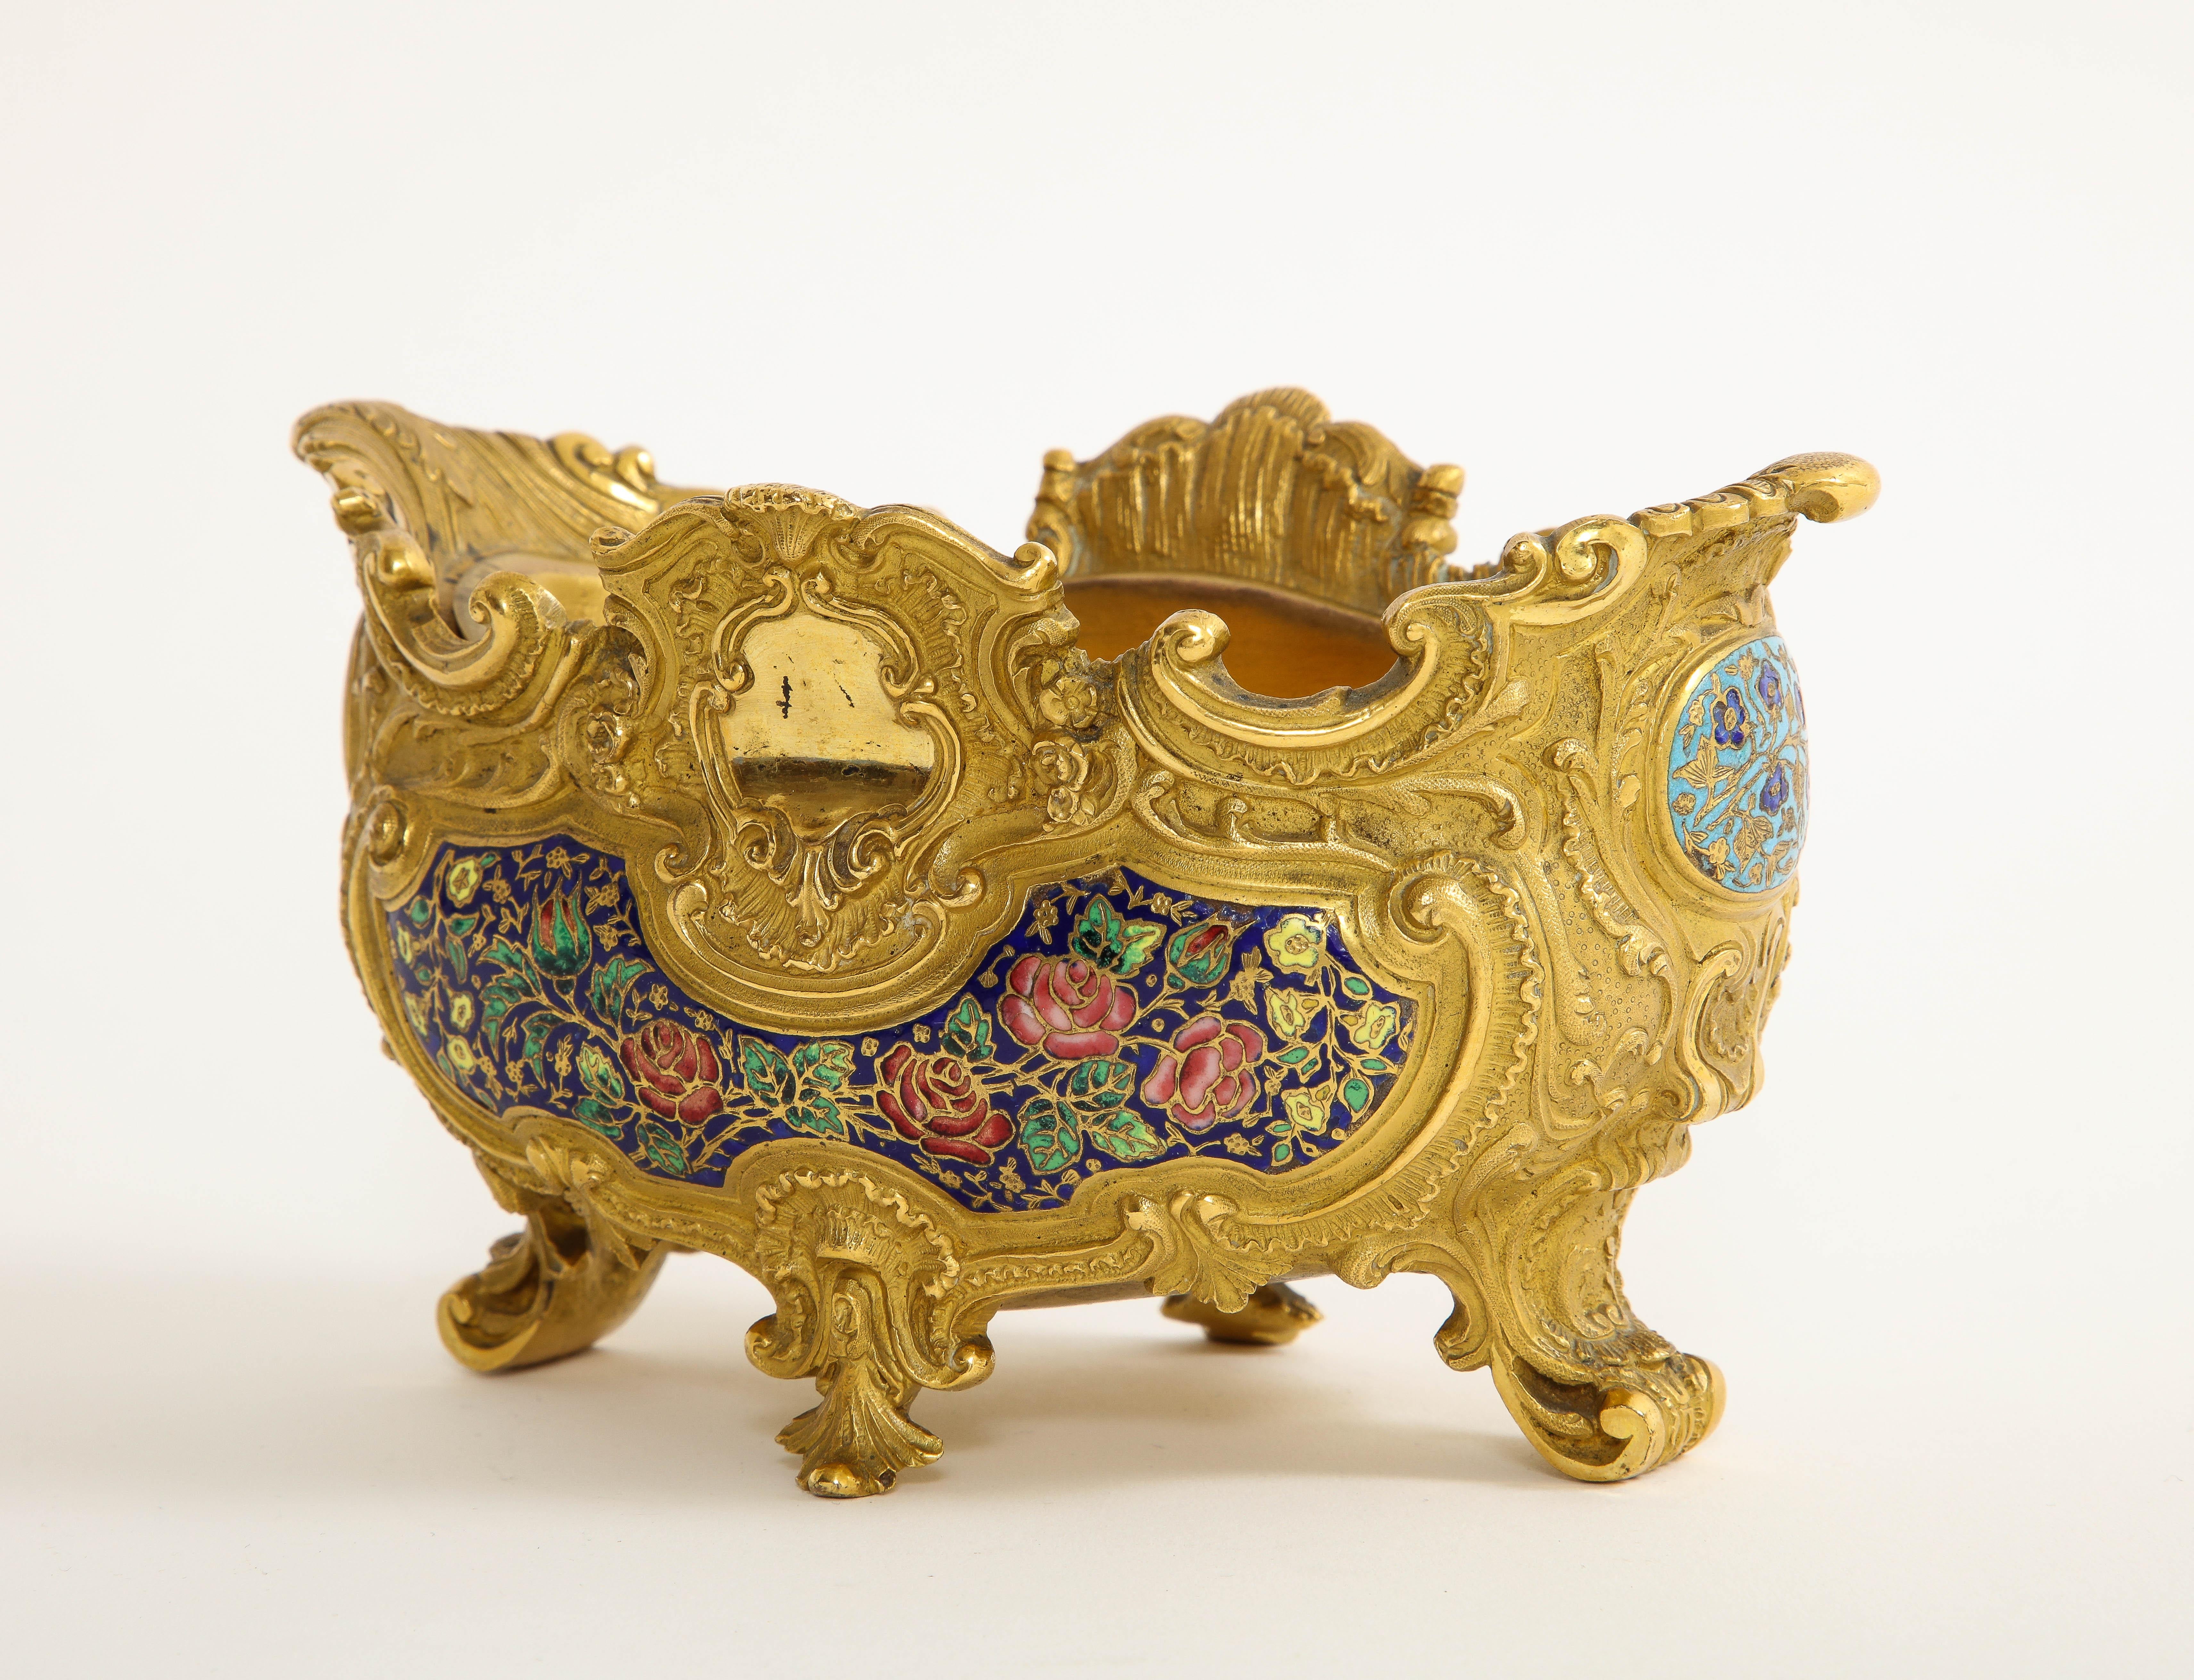 A 19th C. French Ormolu Champlevé Enamel Footed Centerpiece, Att. Barbedienne In Good Condition For Sale In New York, NY